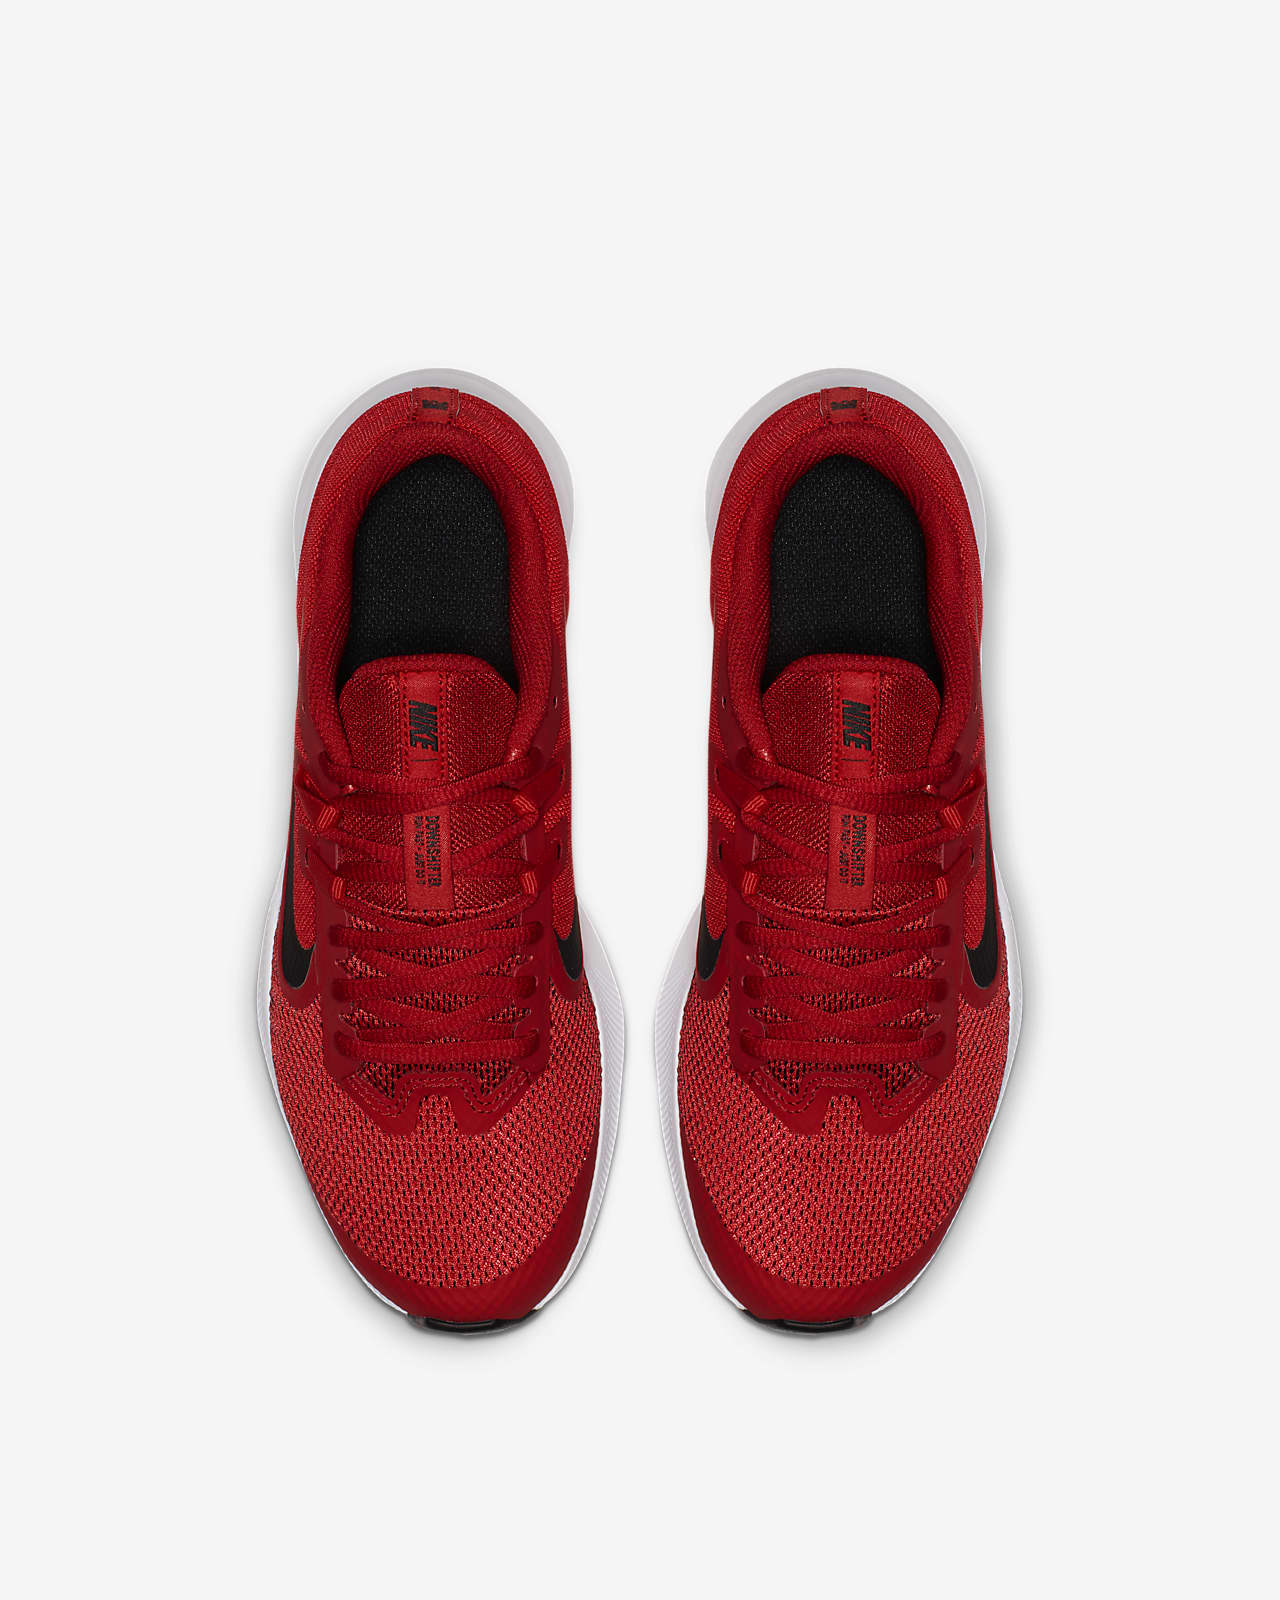 nike downshifter red